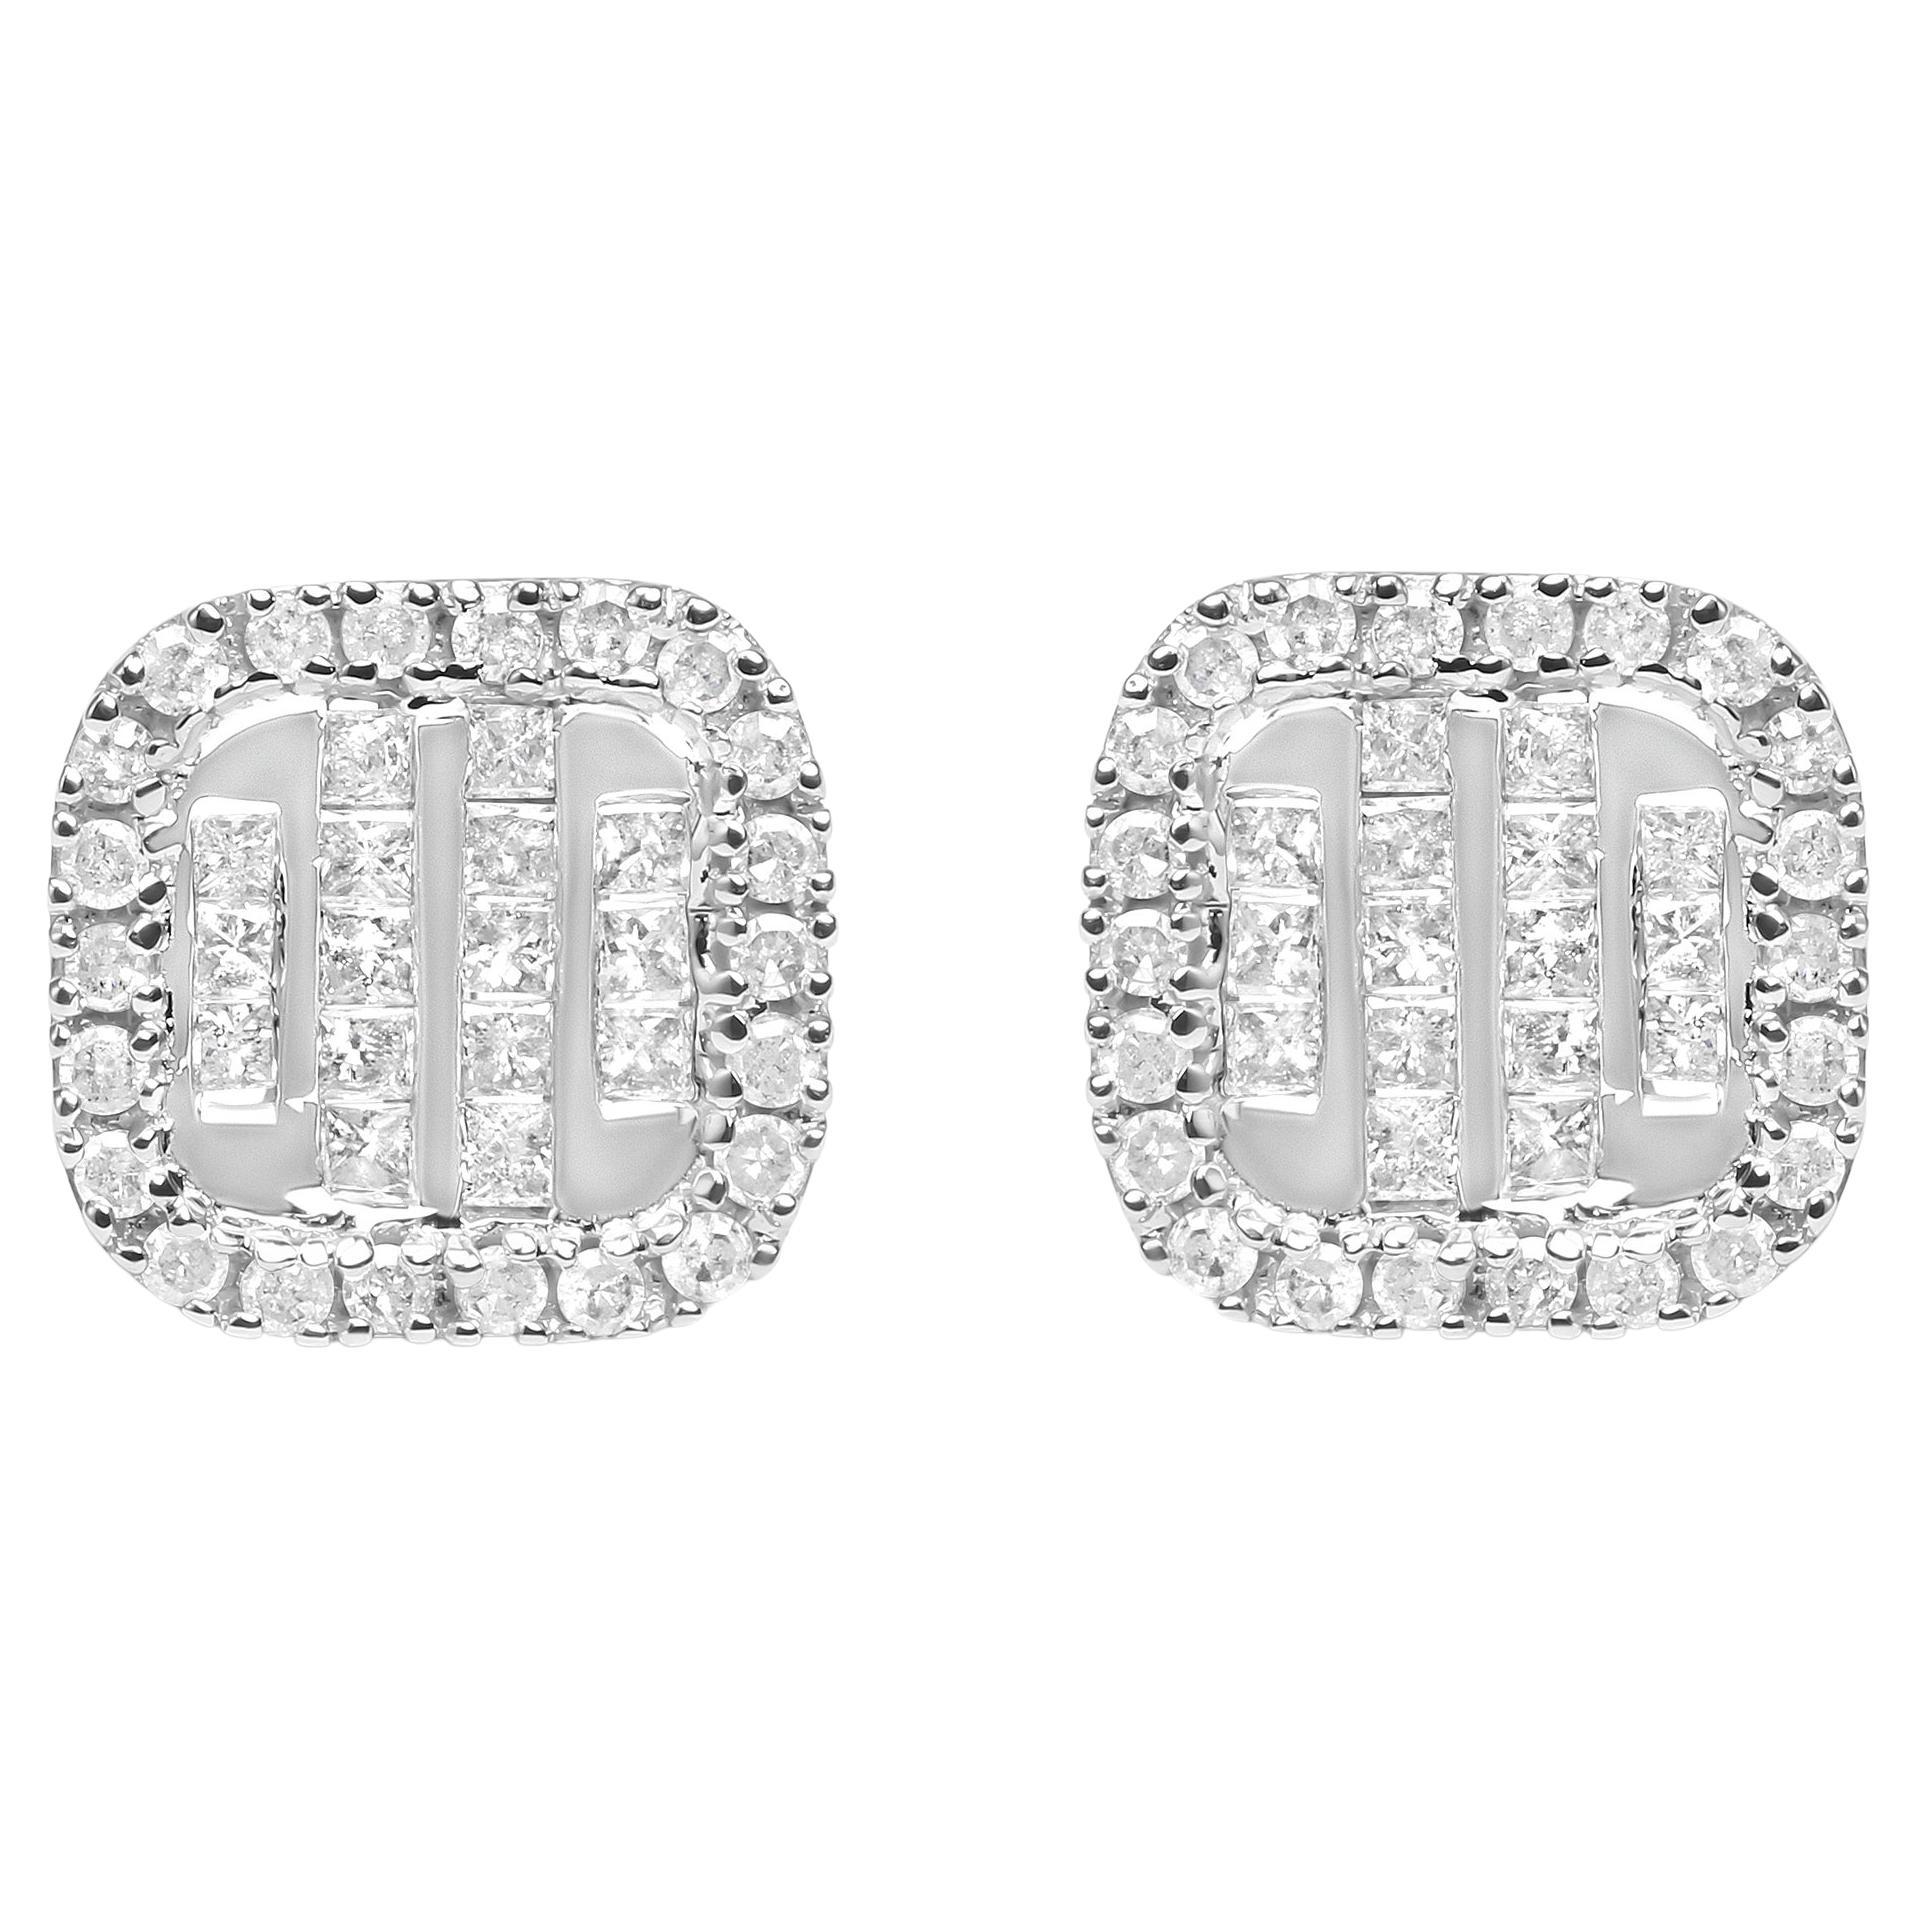 10K White Gold 7/8 Cttw Diamond Princess Composite and Halo Stud Earrings